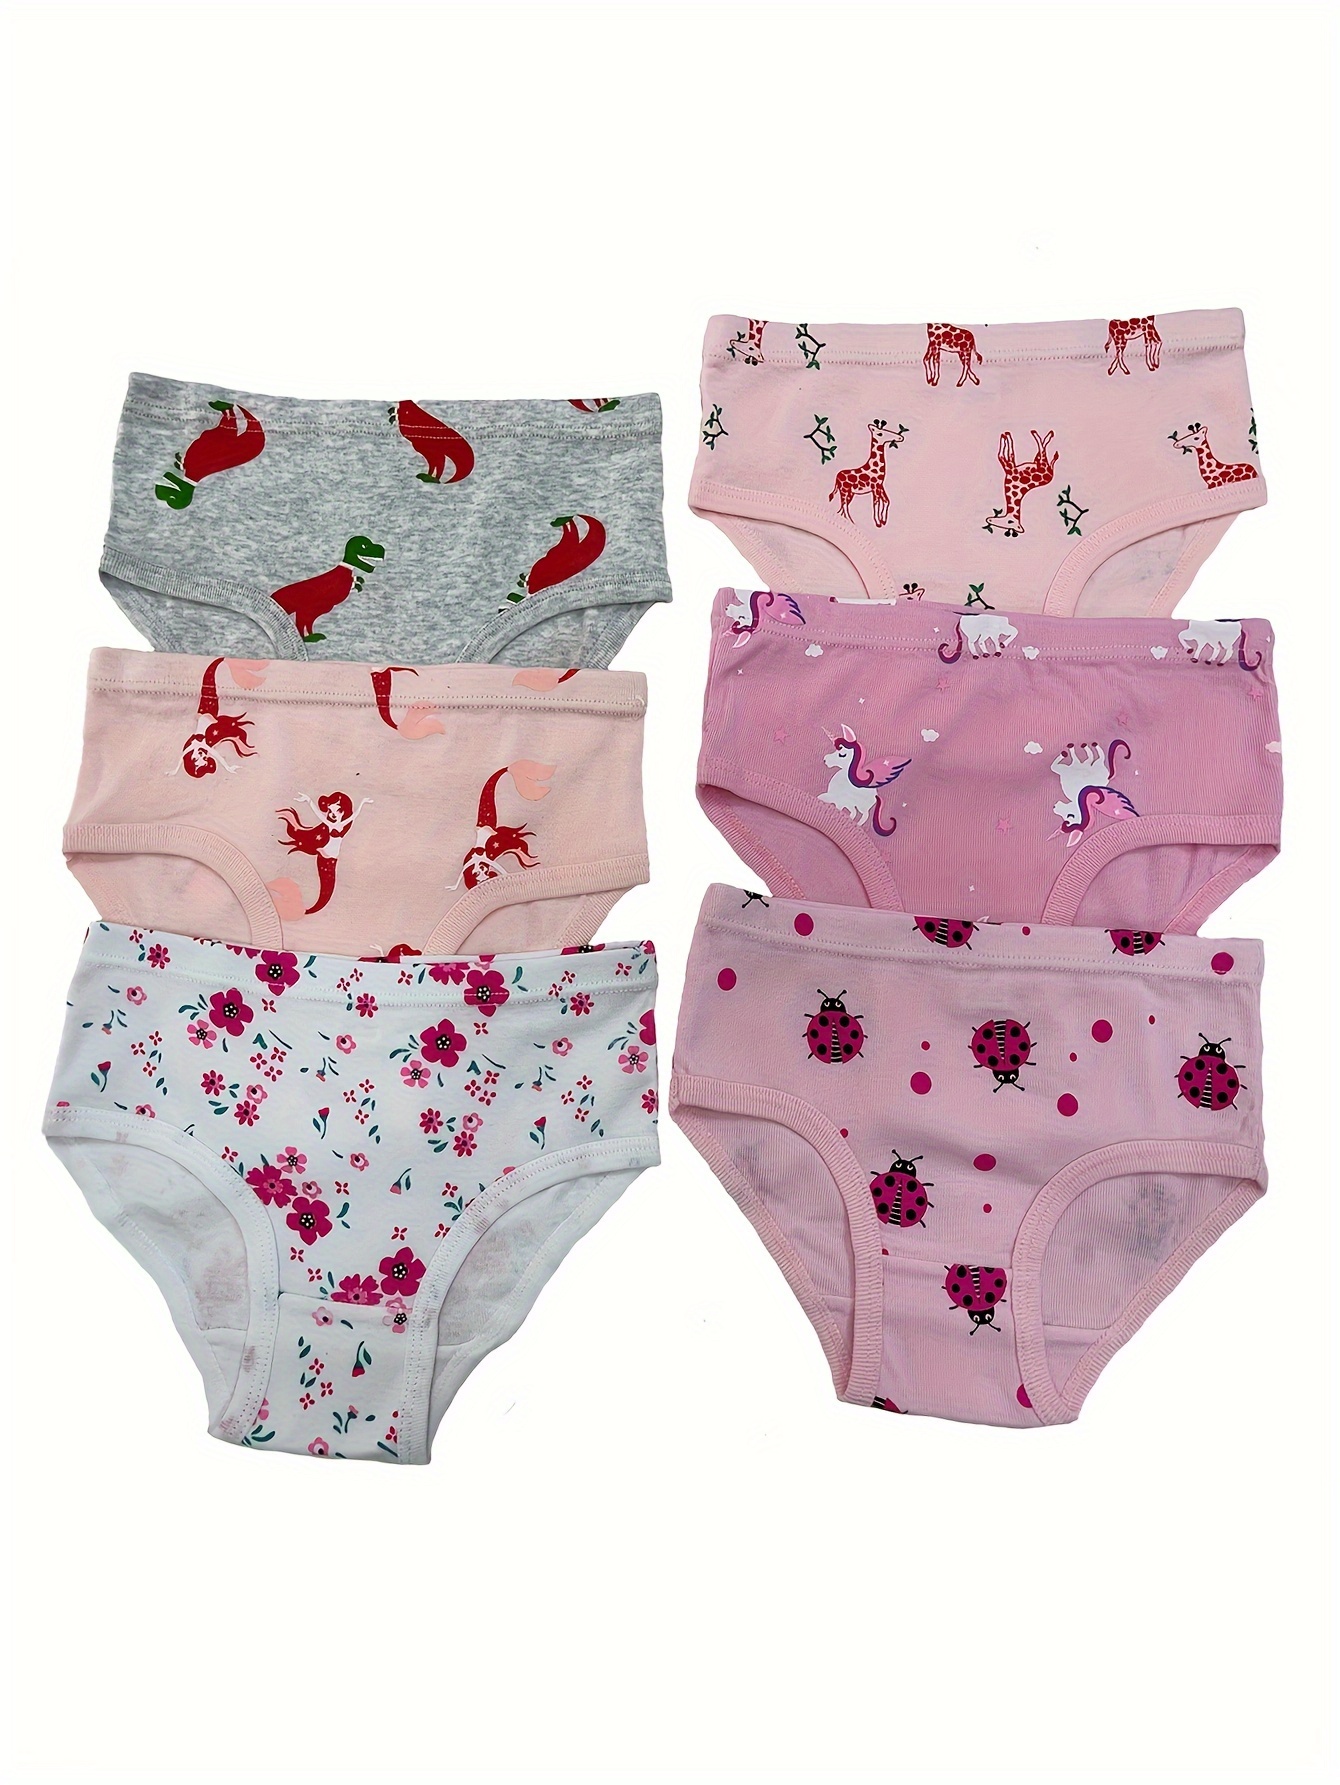 Cotton Underwear Baby Girl Undies Breathable Bloomers Briefs Infant Toddler  Panties Kids Ruffle Assorted Boxer 6-Pack